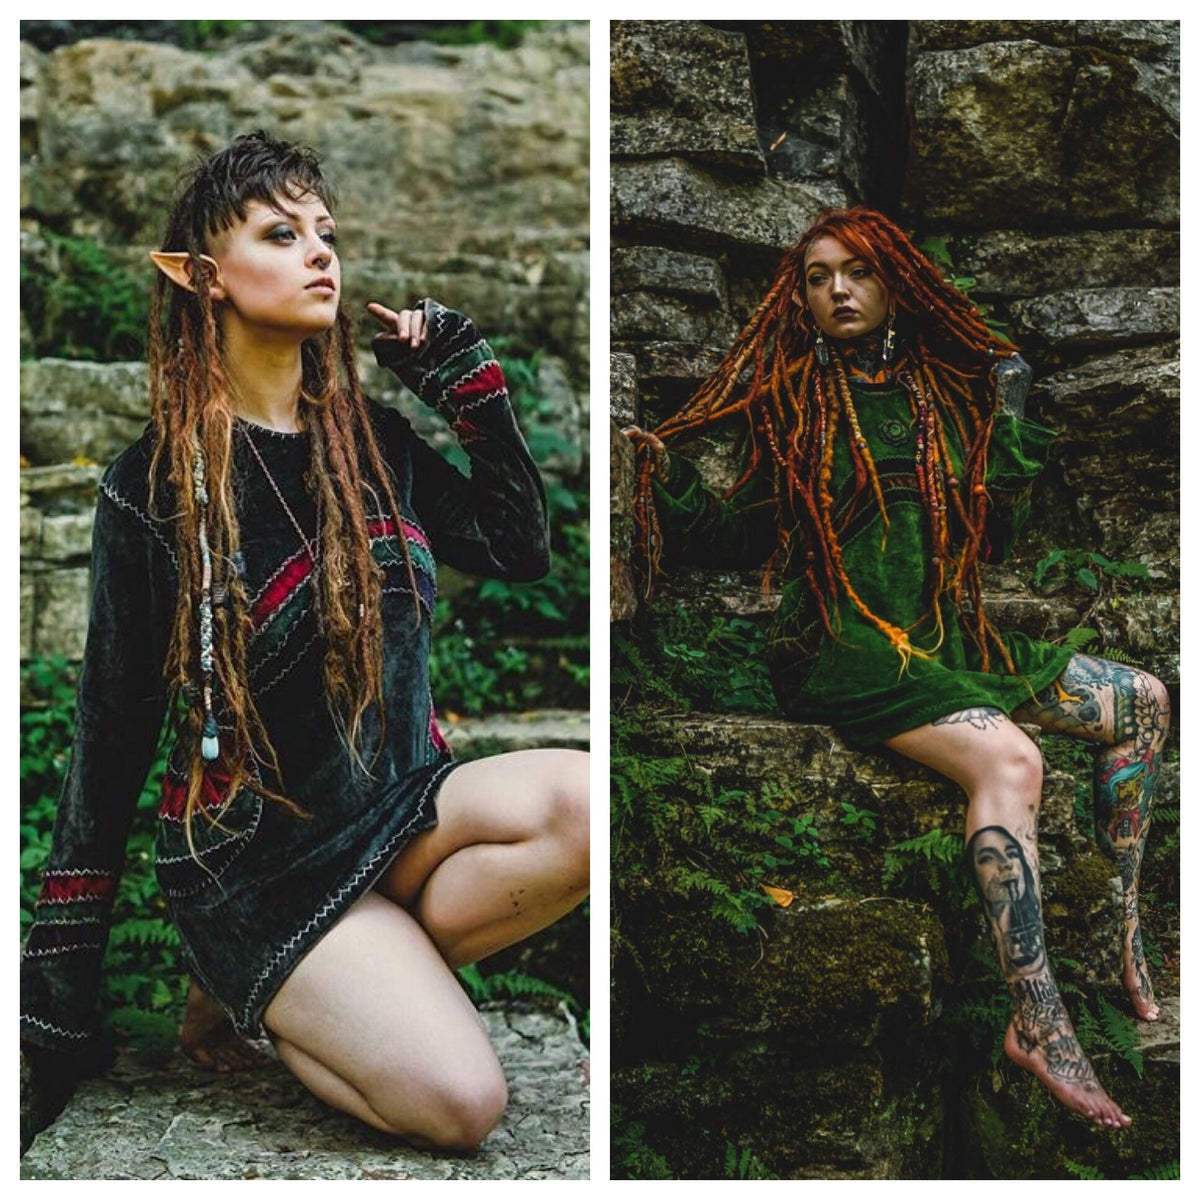 Pixie Bralette Shirt  Earthy clothing inspired by fairytale and festivals  as well as by underground communities of artists and travelers.